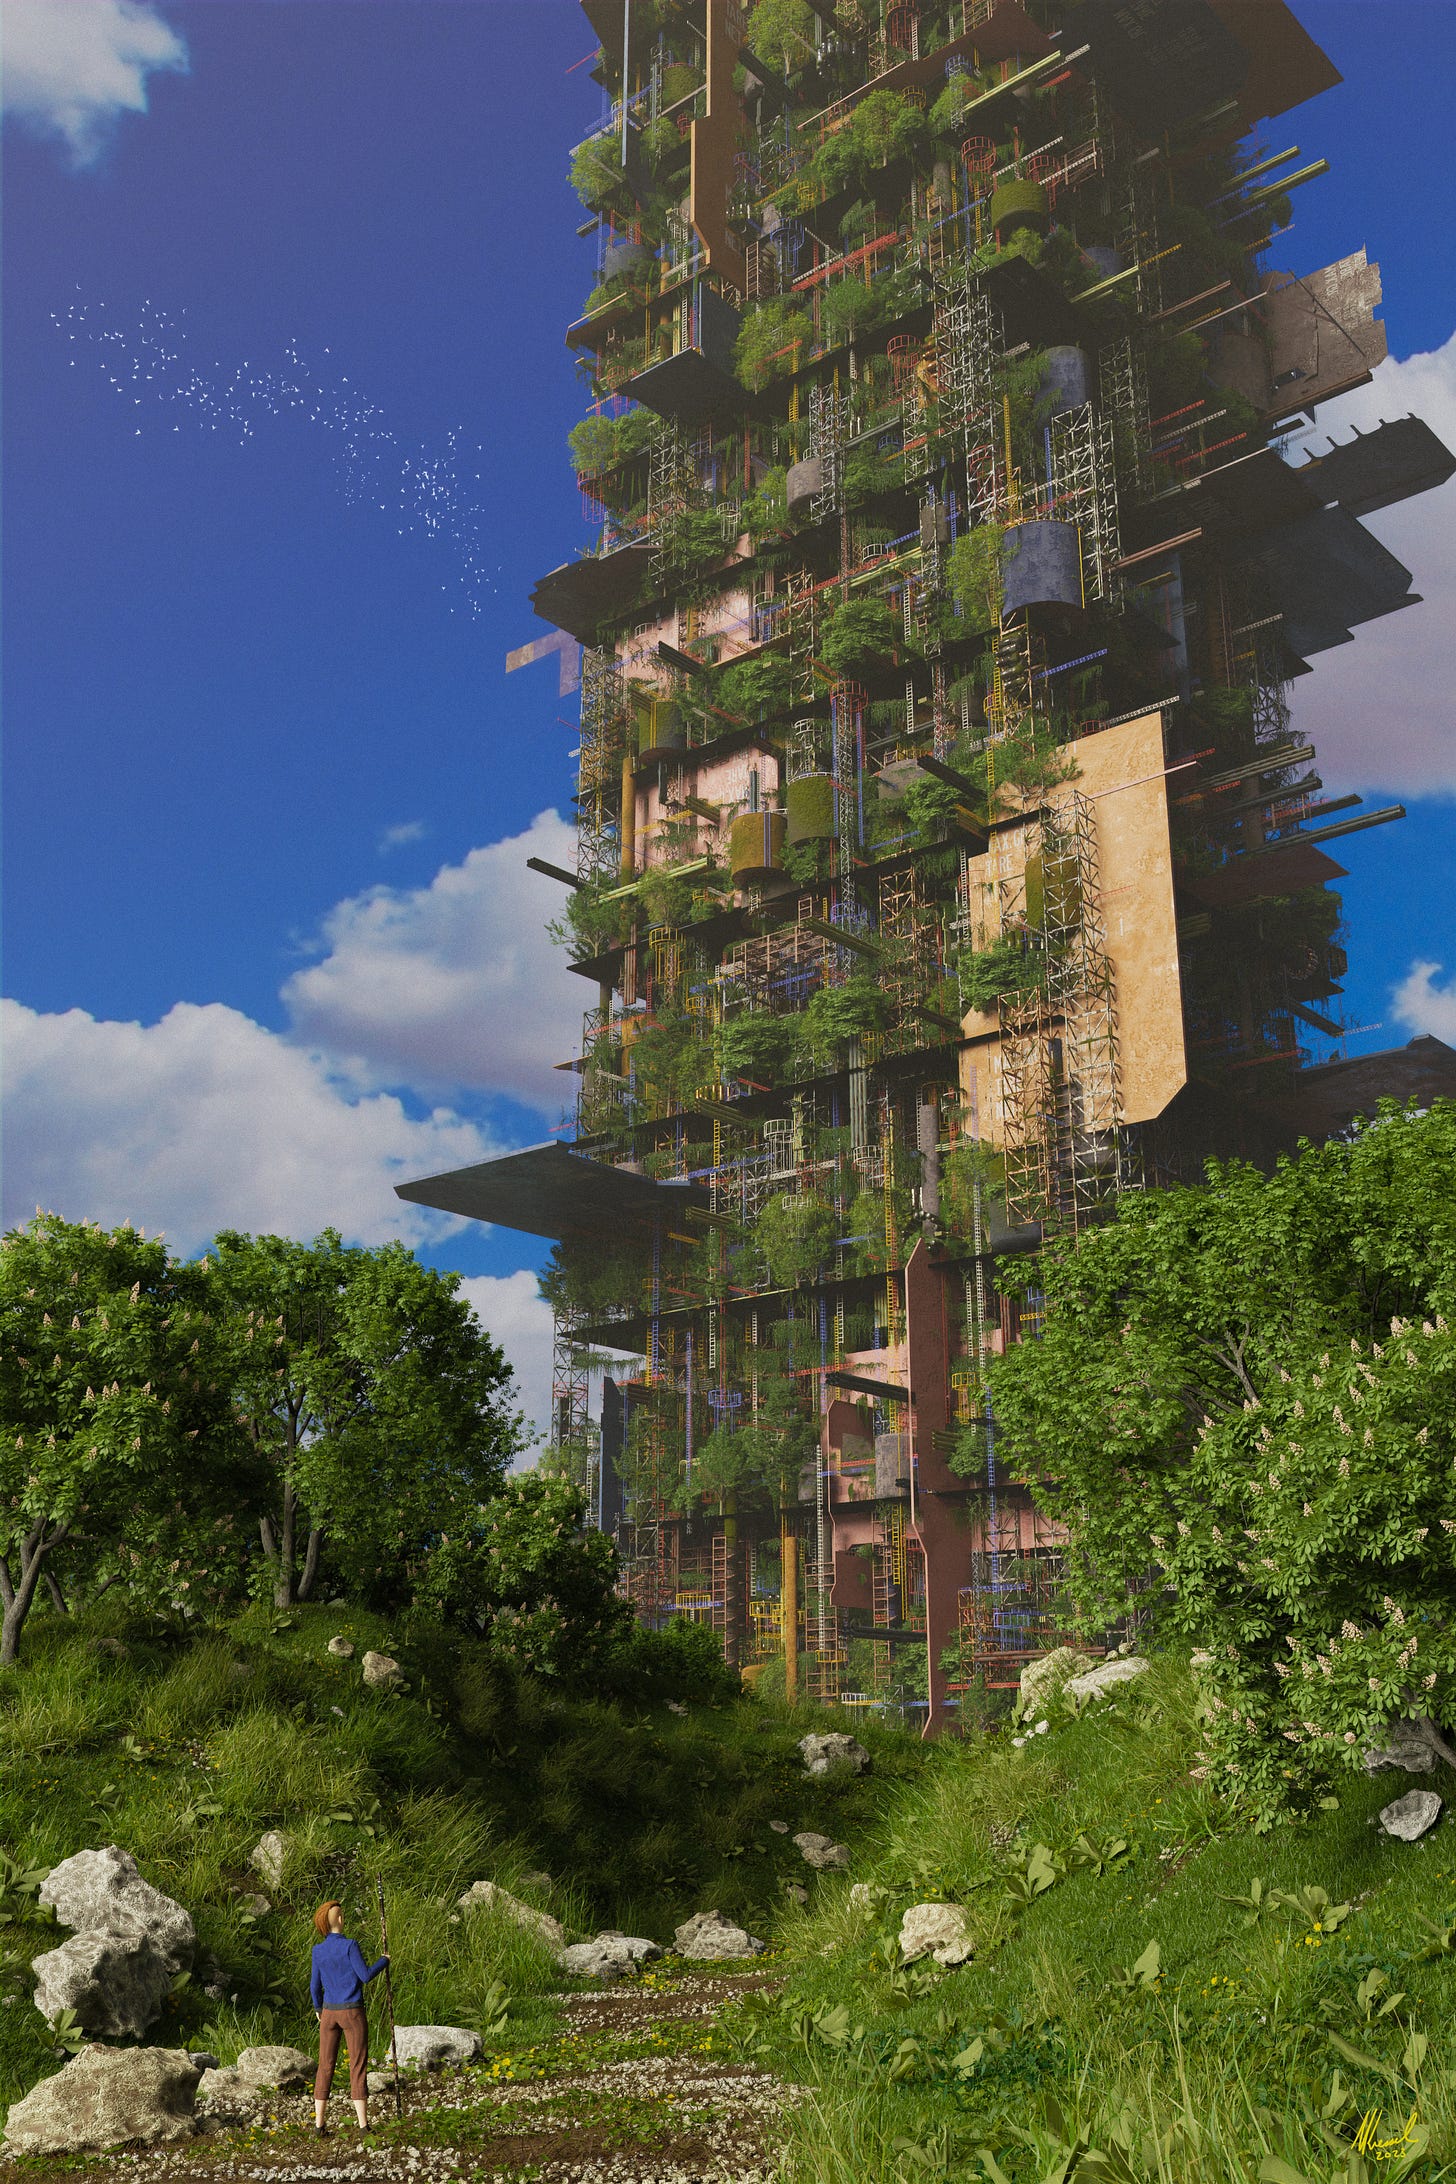 In this possible future, a young woman stares up at an old CO2 scrubber tower. Once used to filter excess CO2 from the air, the tower has fallen into disuse, and nature has taken over. 